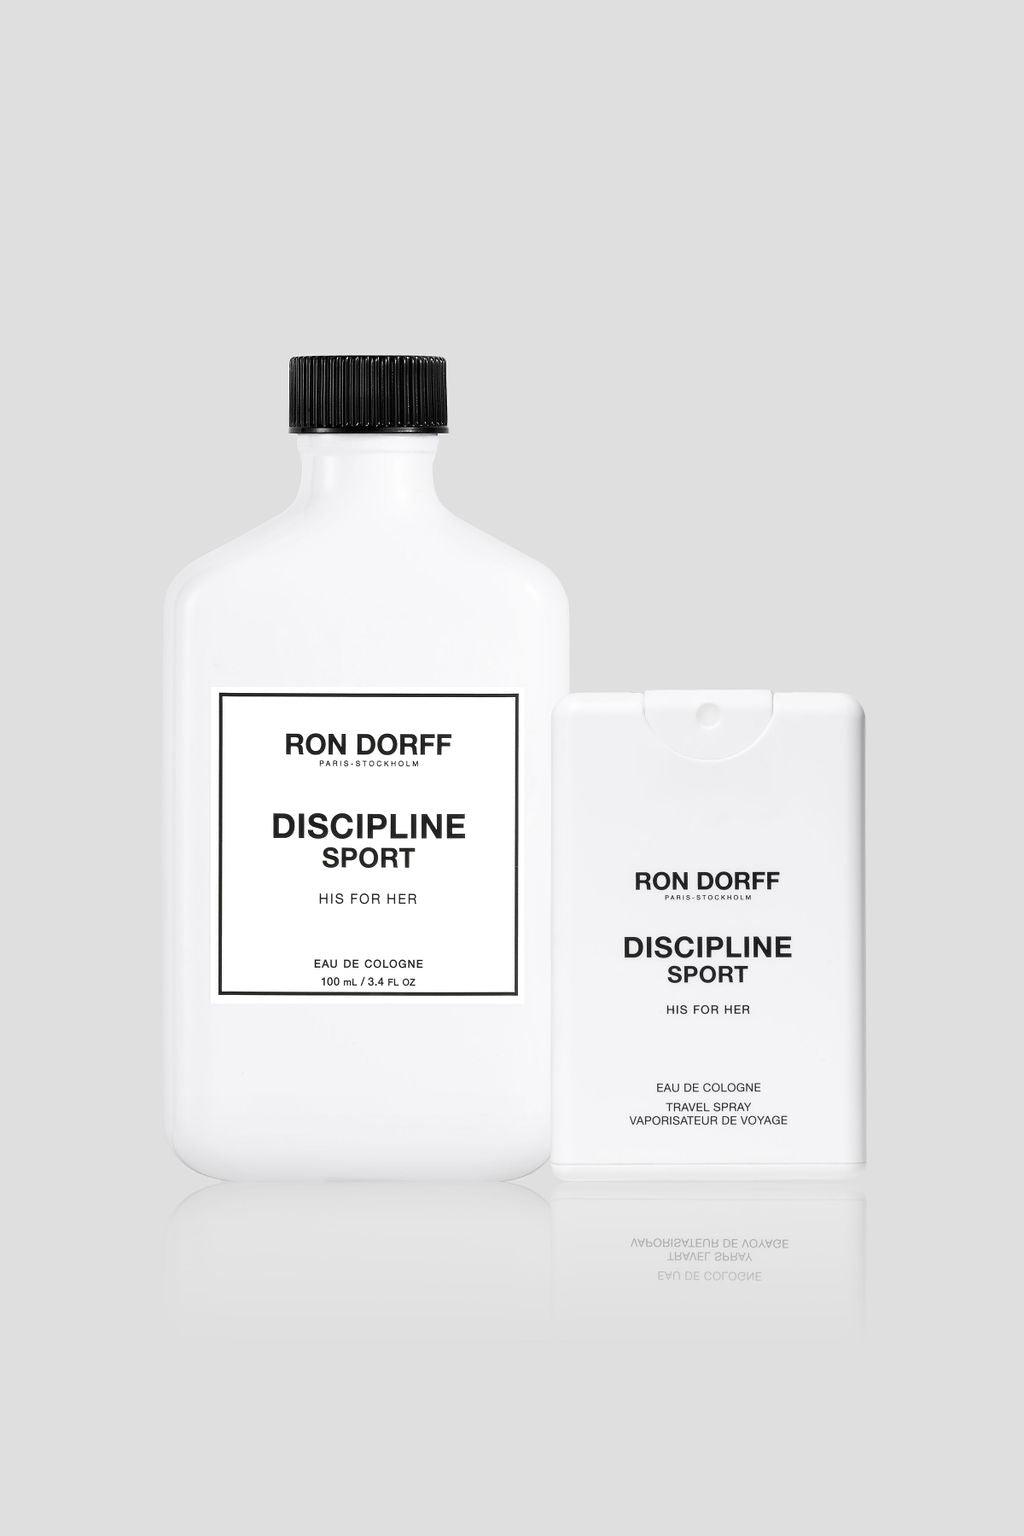 DISCIPLINE SPORT HIS FOR HER TRAVEL SPRAY - SCENT BEAUTY